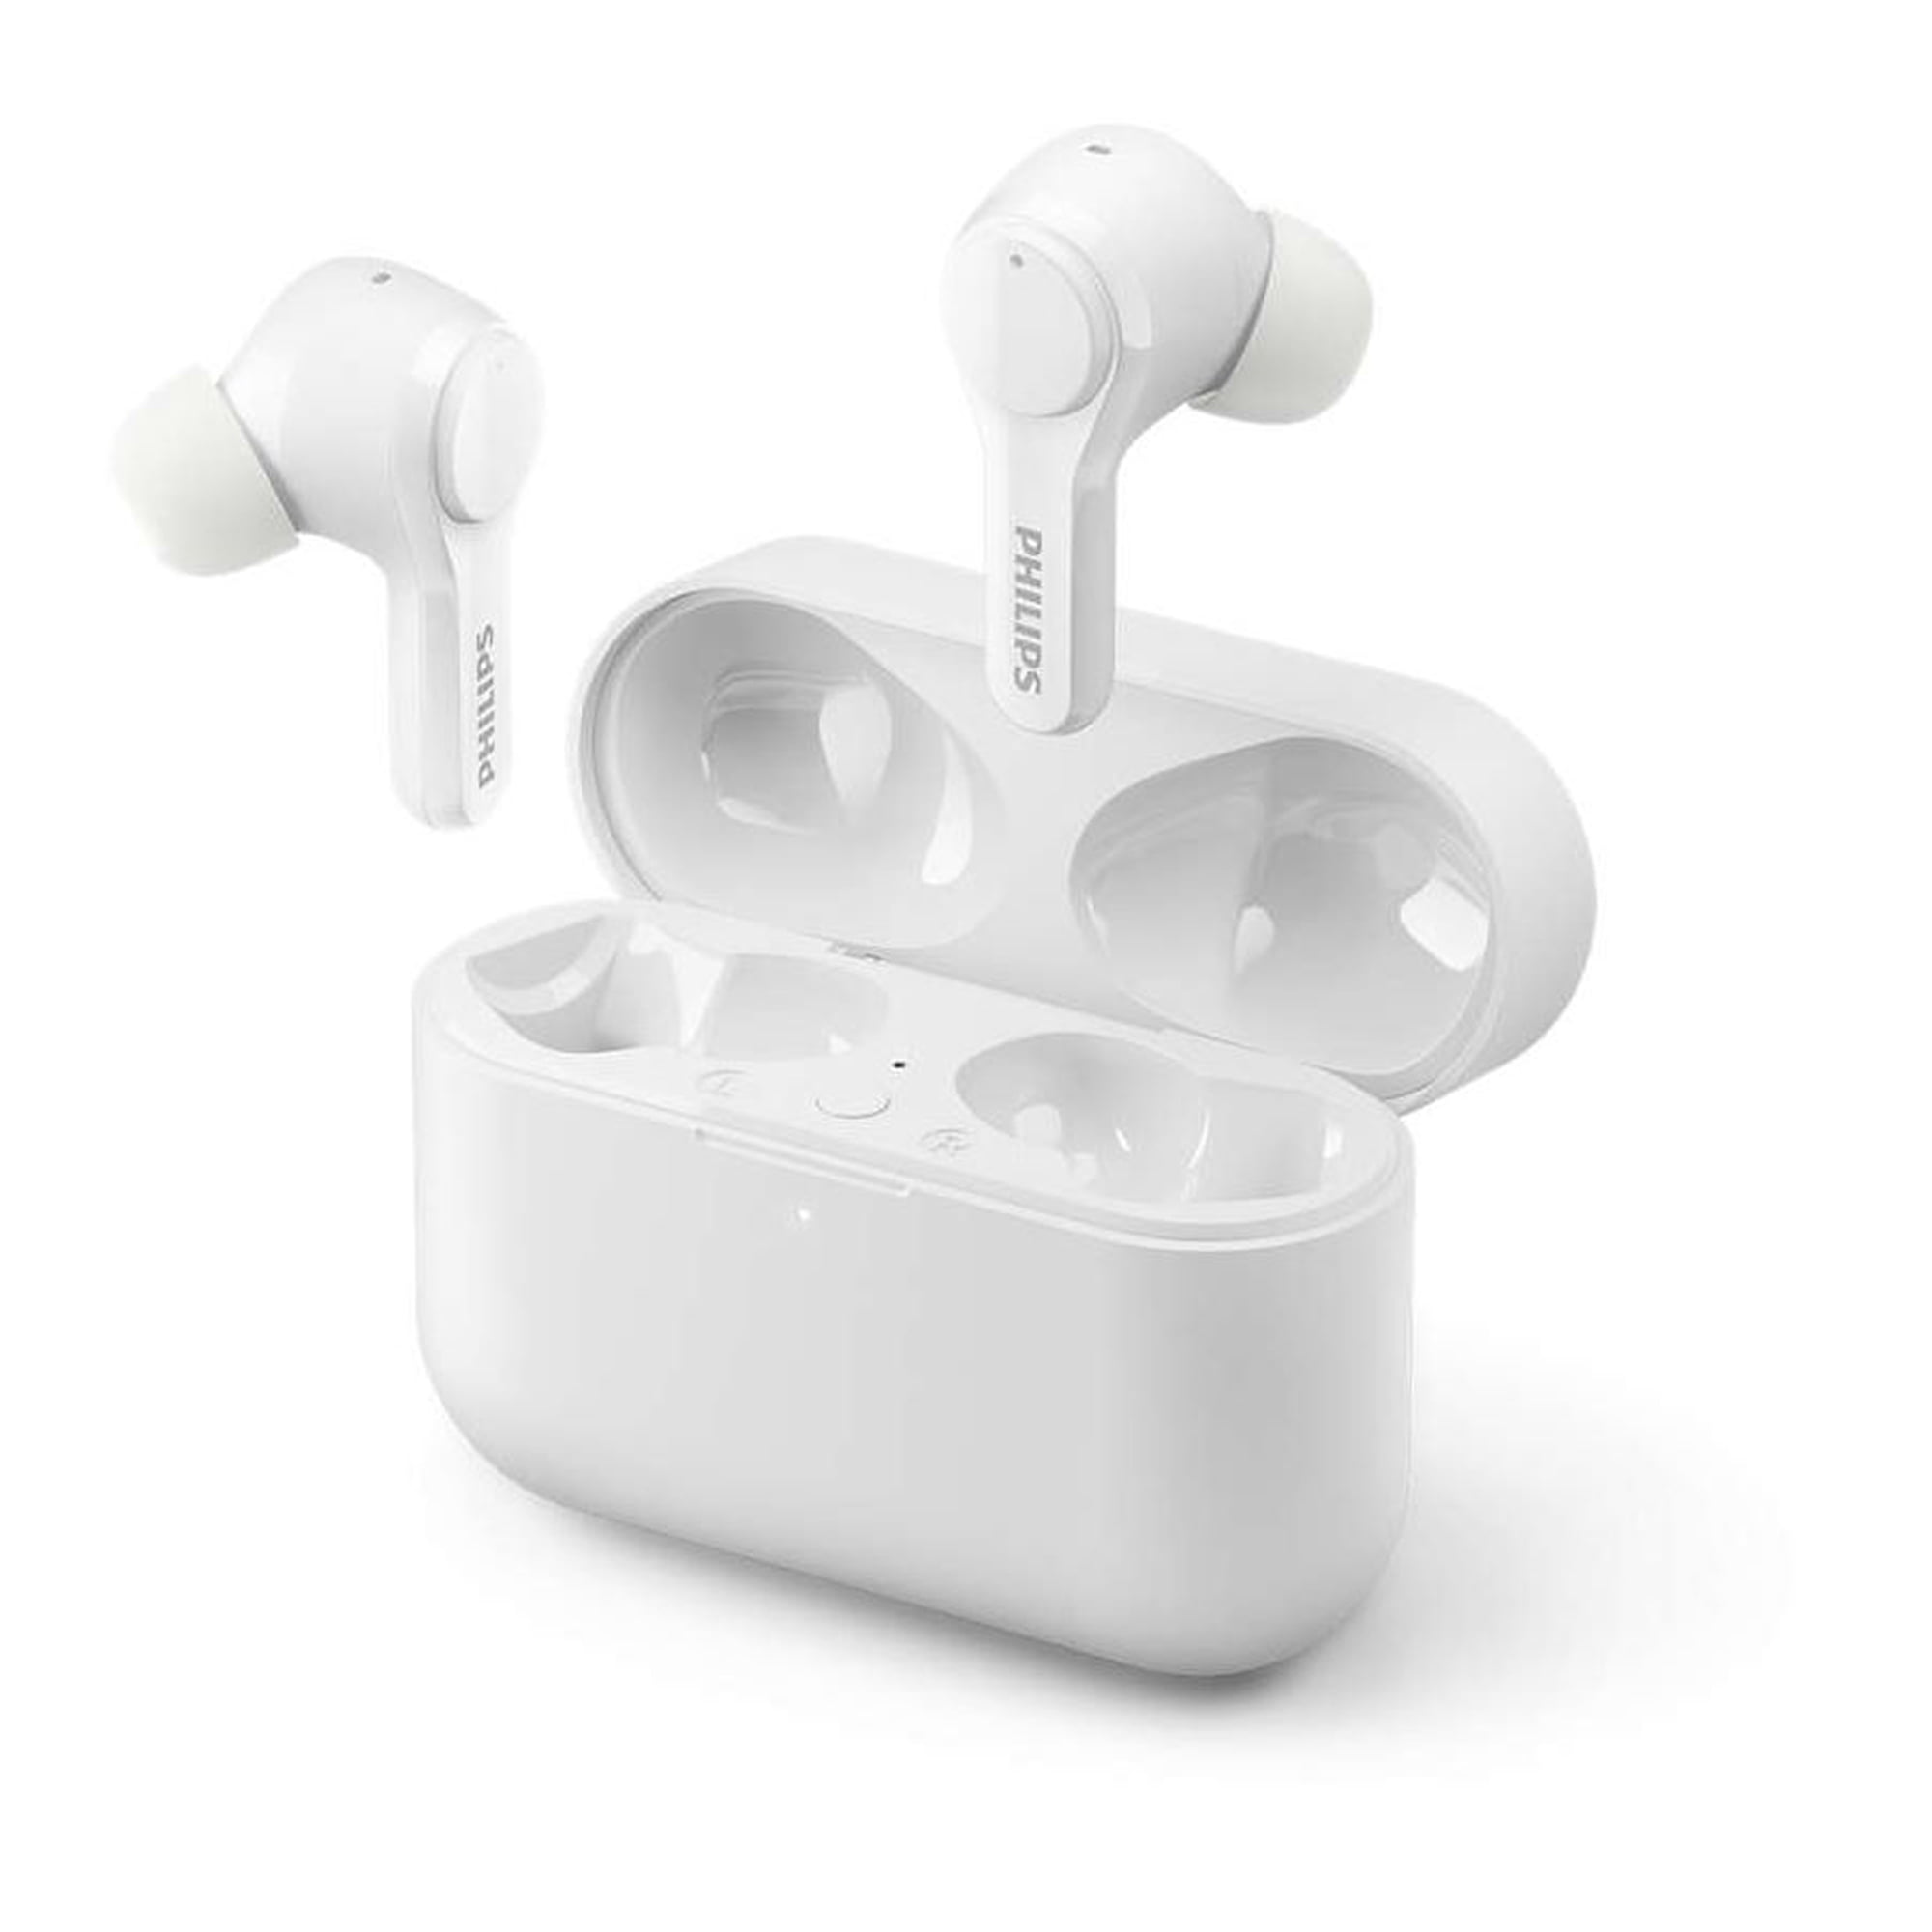 nut out of service Inflate Philips T3217 True Wireless Headphones with Dual-Mic Environmental Noise  Cancellation and IPX5 Water Resistance, White - Walmart.com